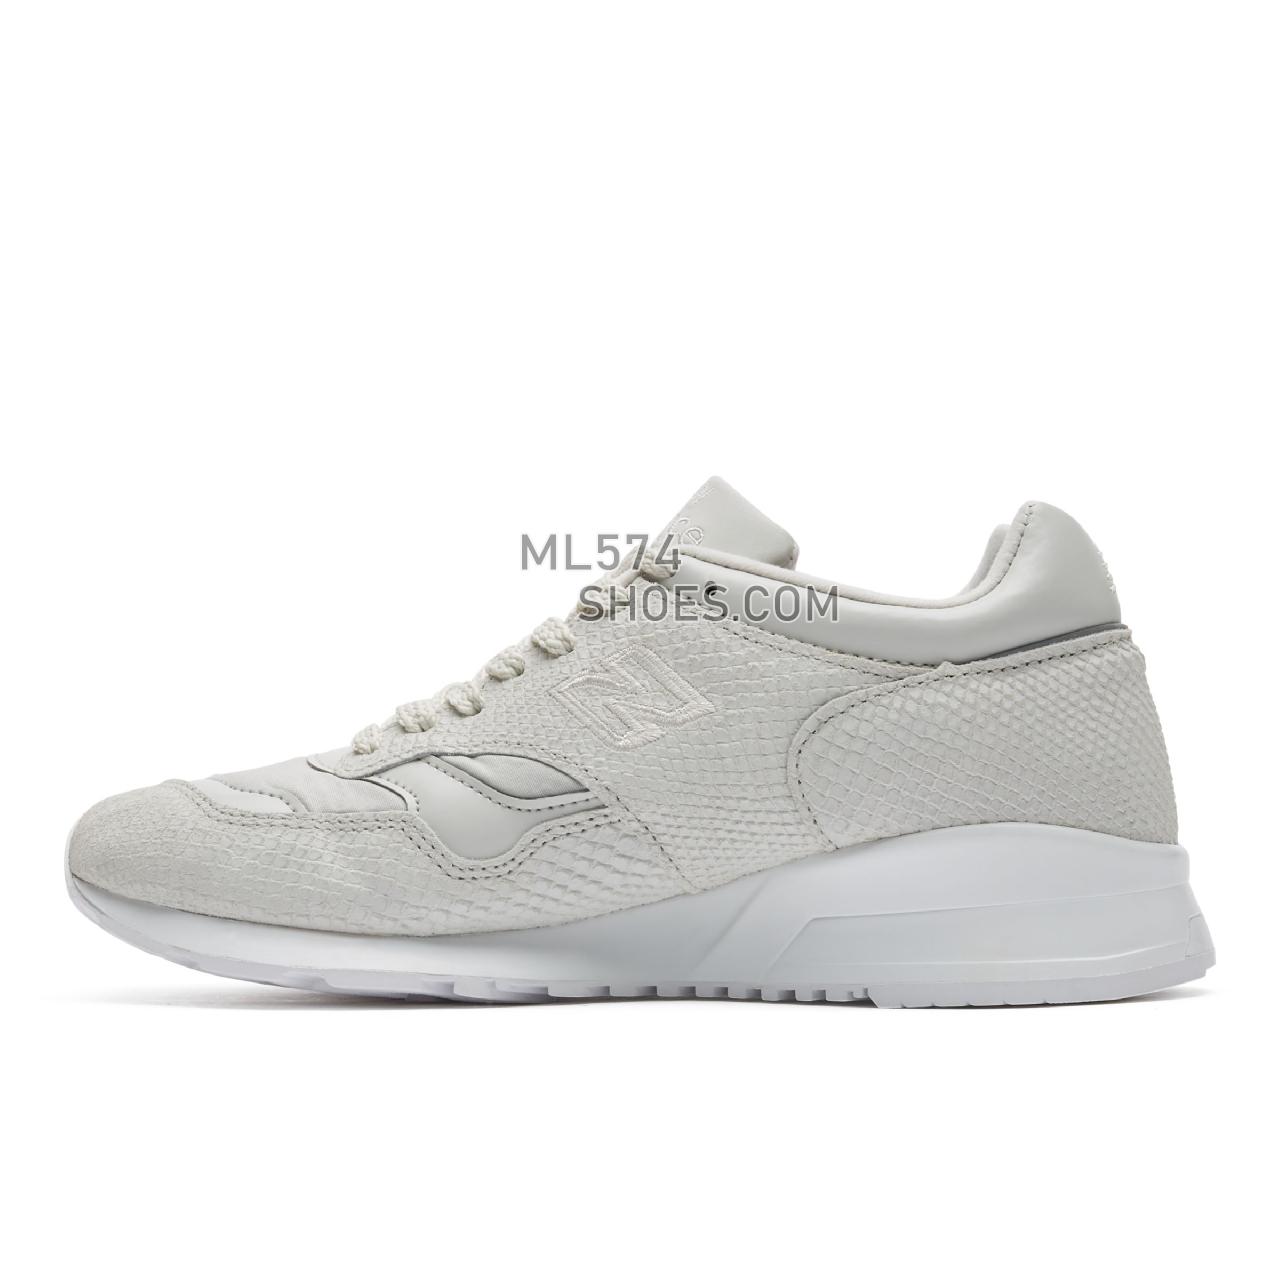 New Balance Made in UK 1500 Reptile Luxe - Men's Made in UK 1500 Reptile Luxe - Off White with White - W1500RWH